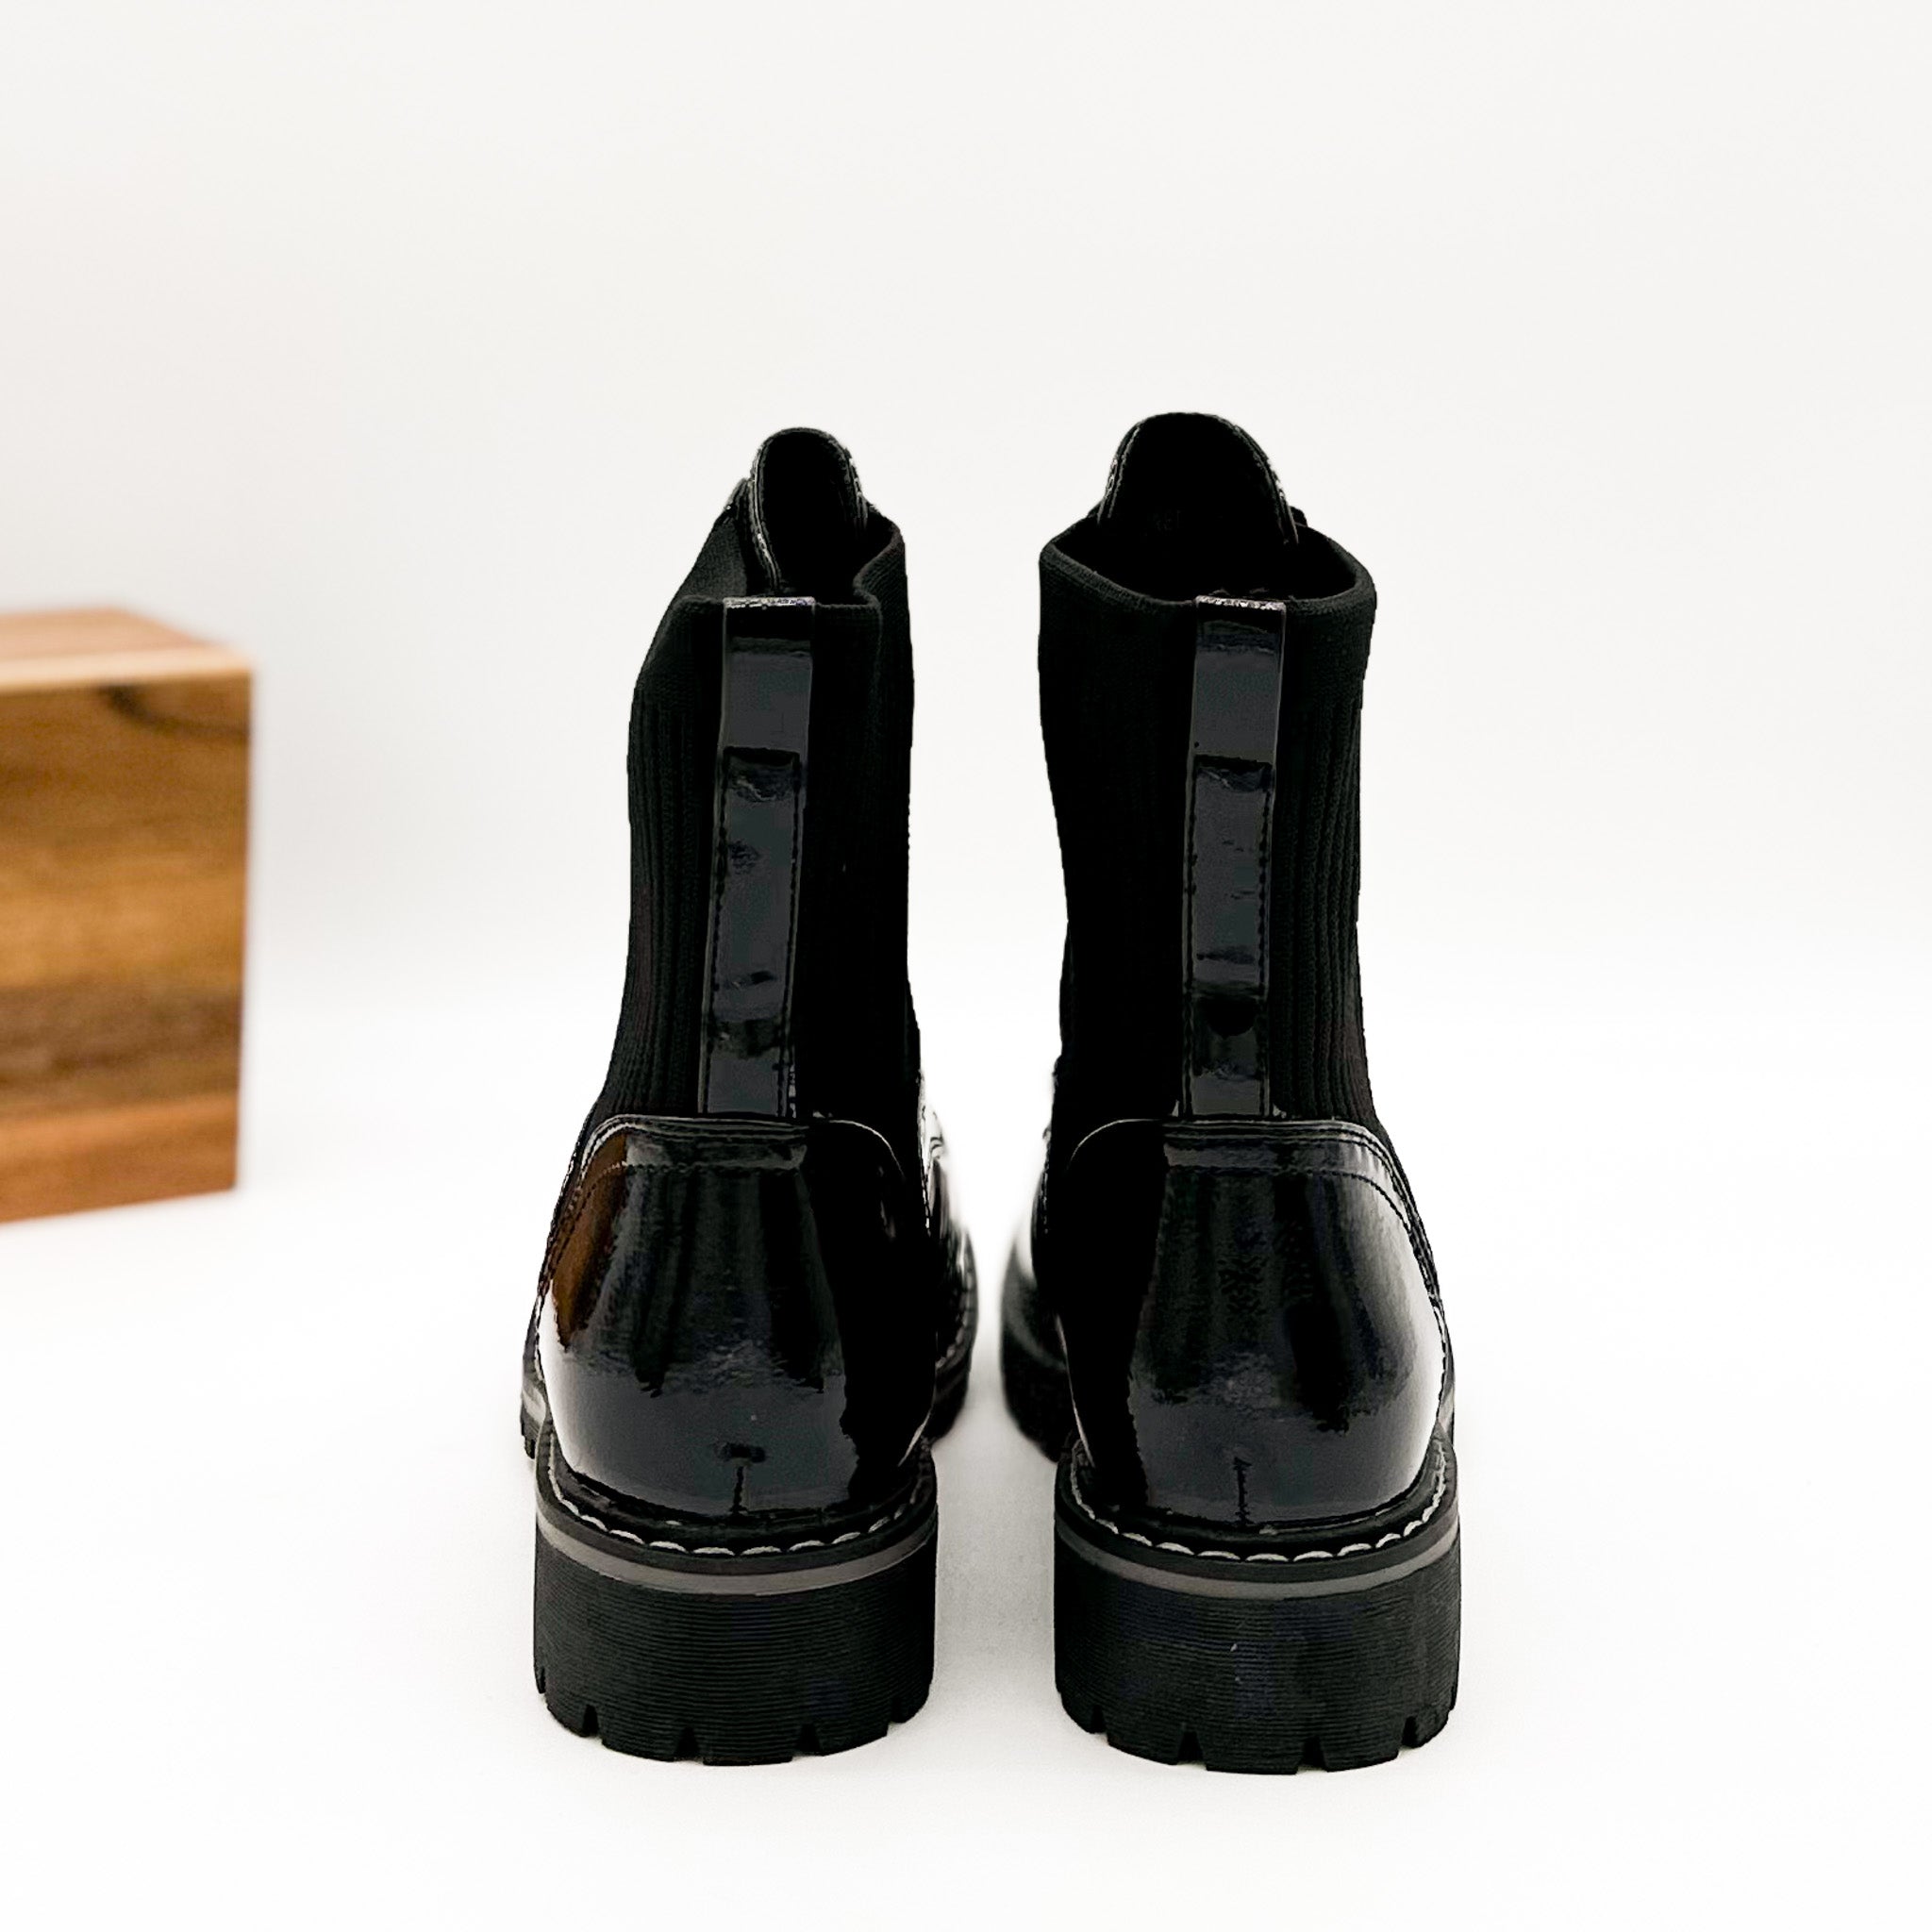 Corkys Creep It Real Boot in Black Patent